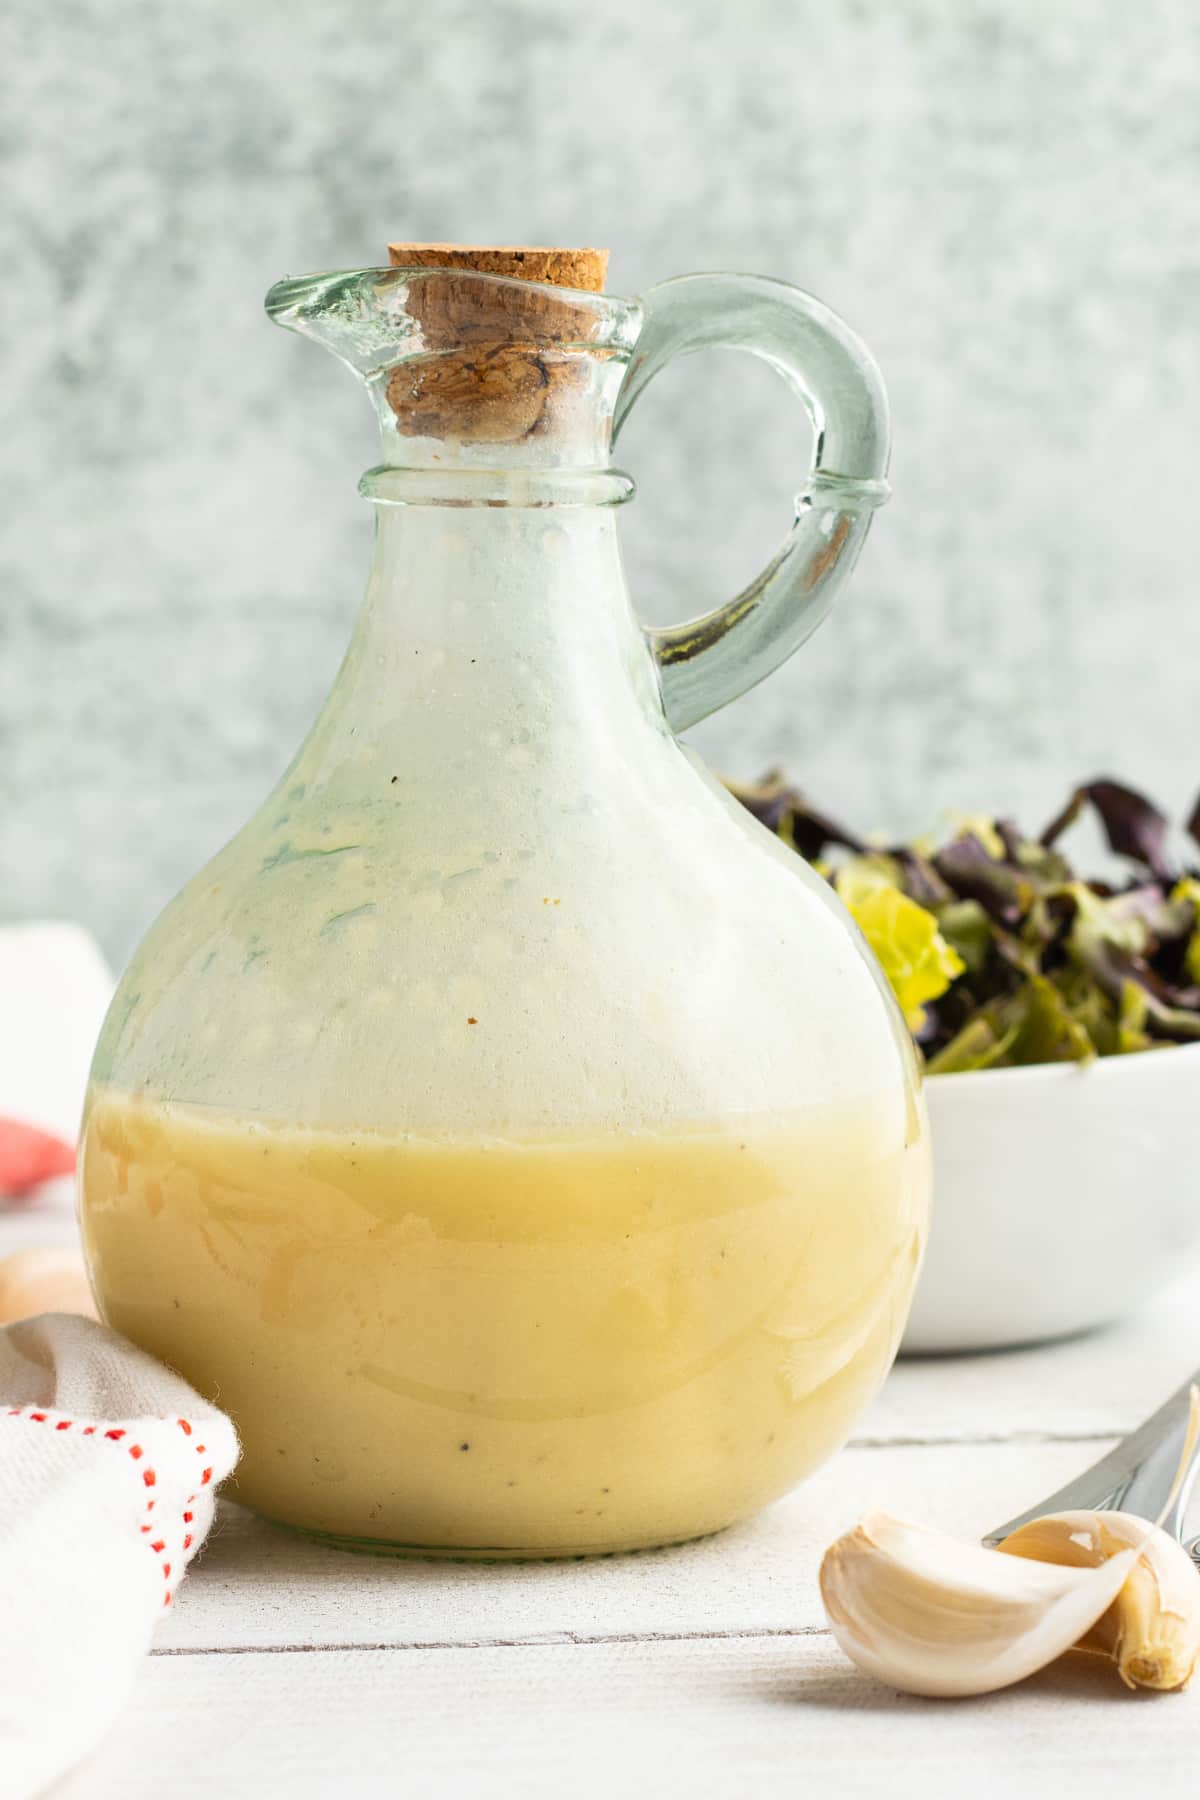 Picture of a jar filled with champagne vinaigrette.